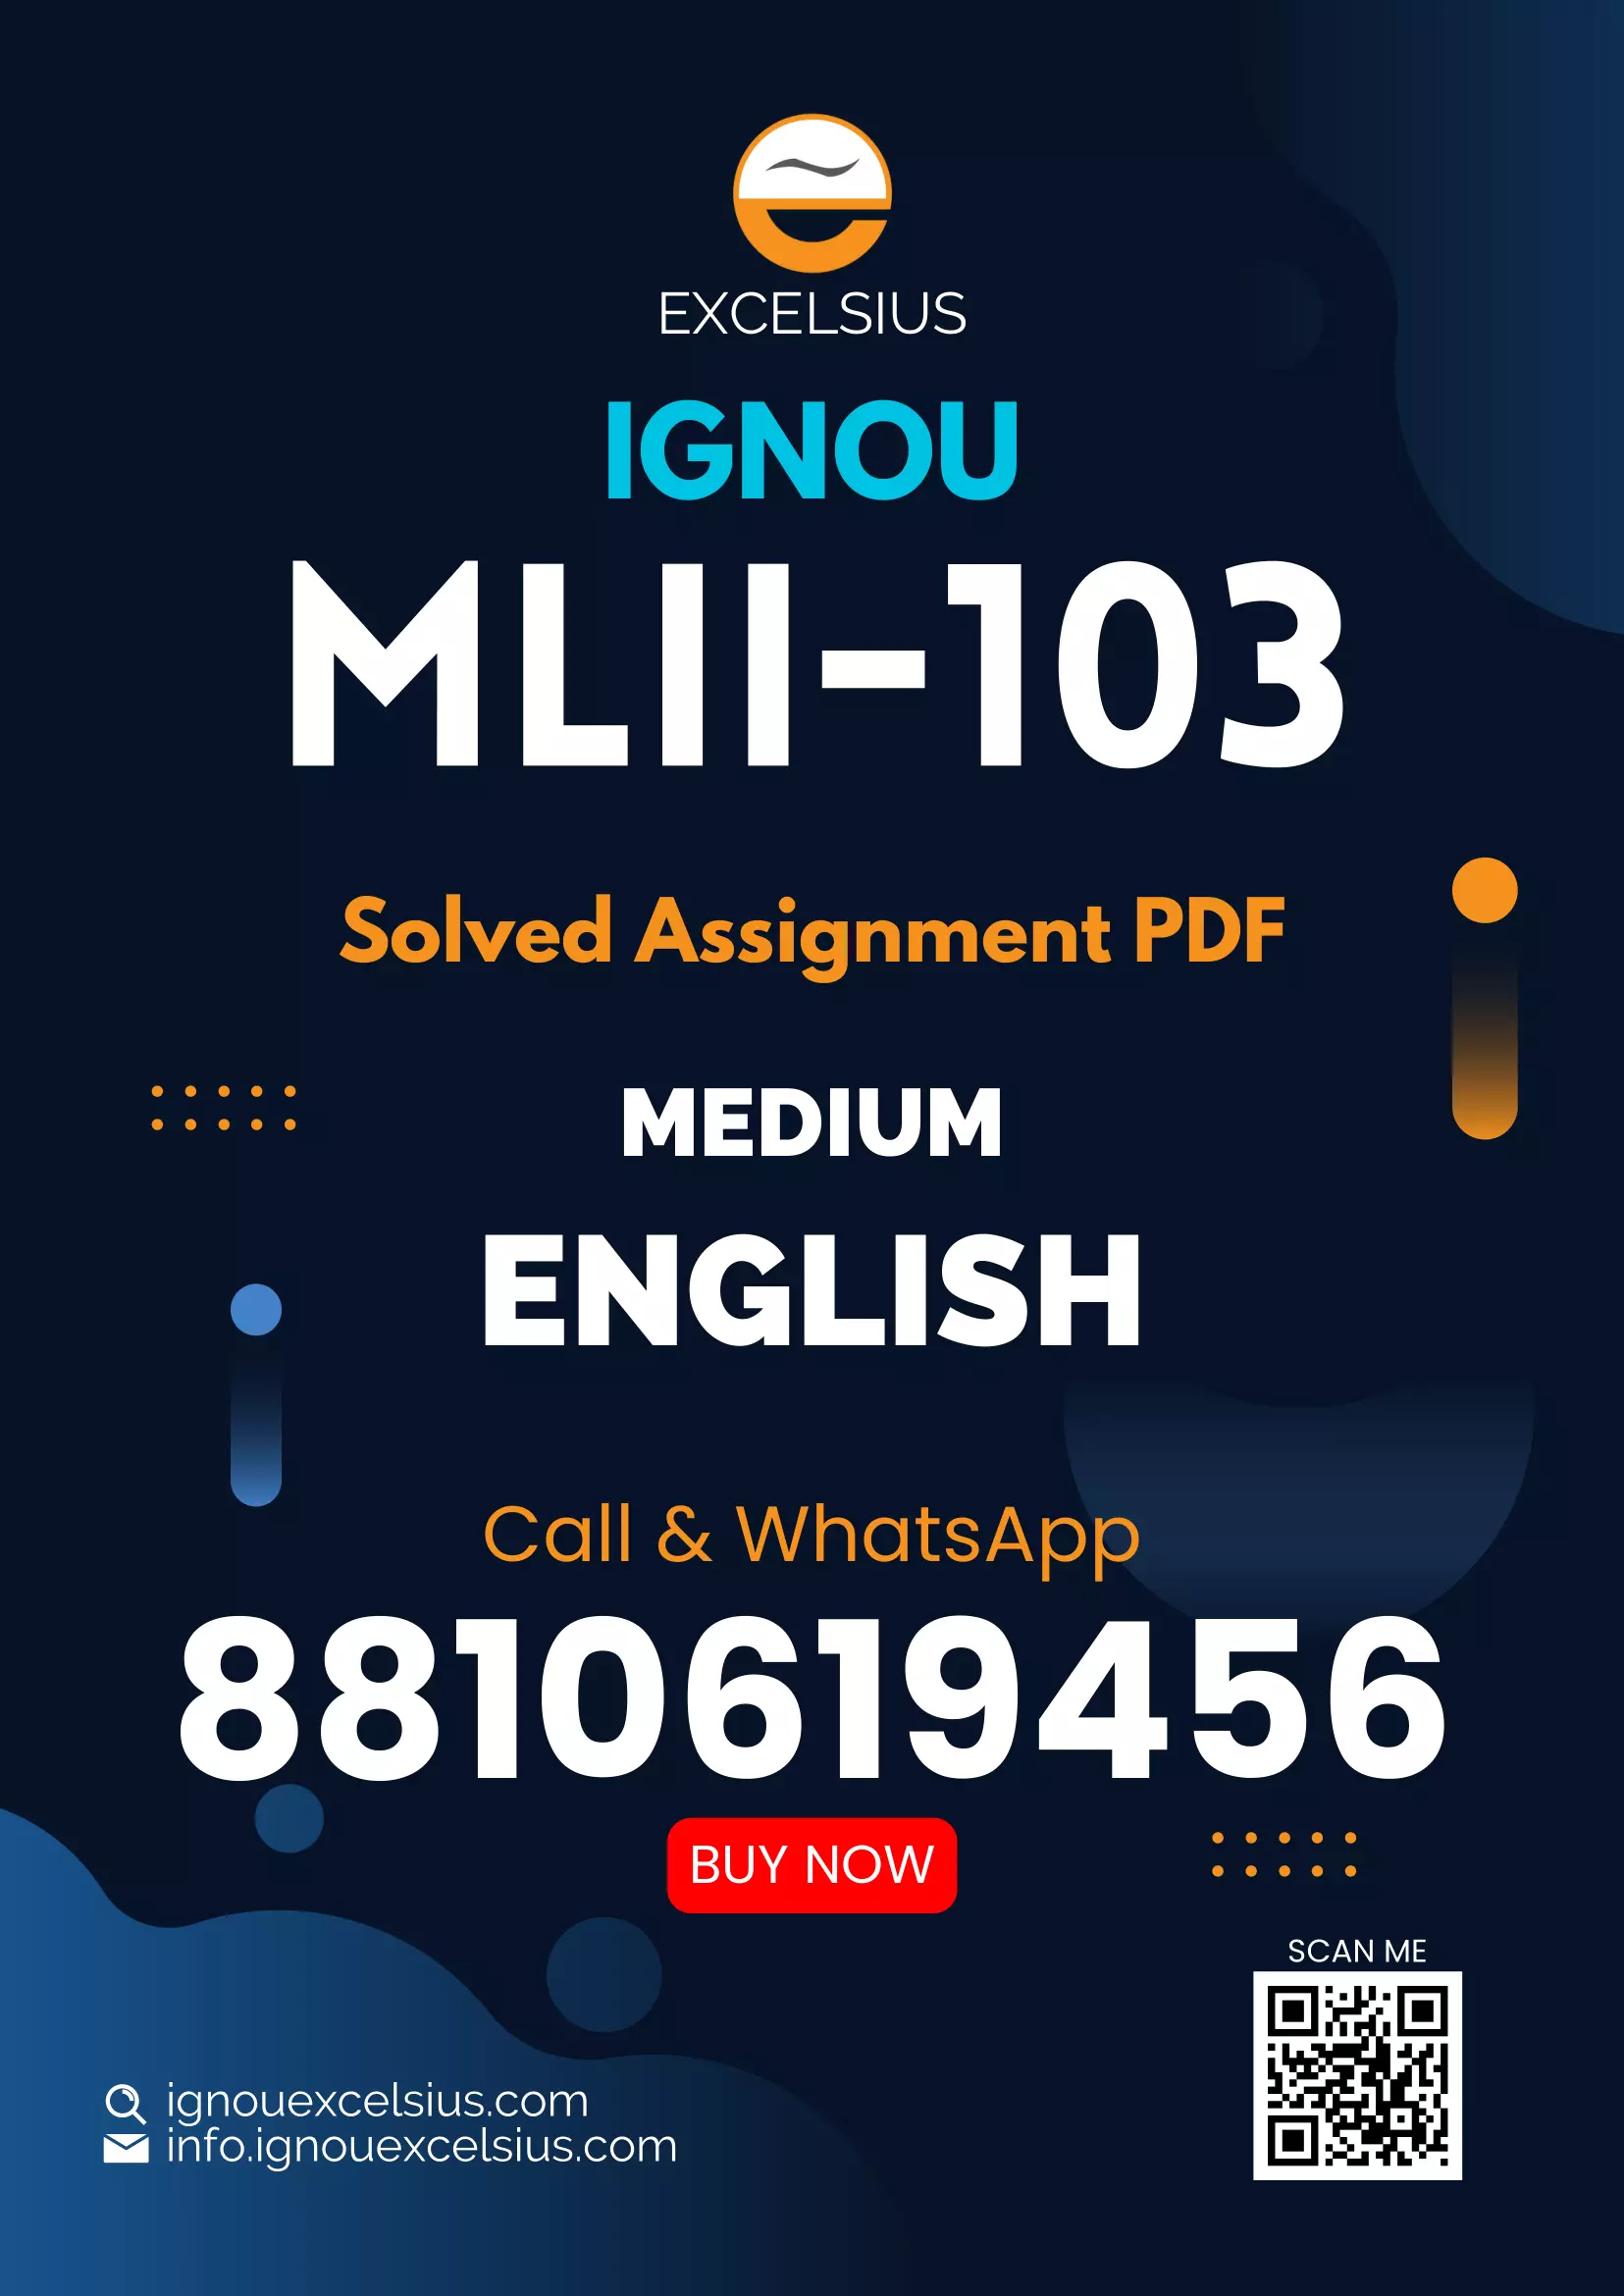 IGNOU MLII-103 - Fundamentals of Information Communication Technologies, Latest Solved Assignment-July 2022 – January 2023